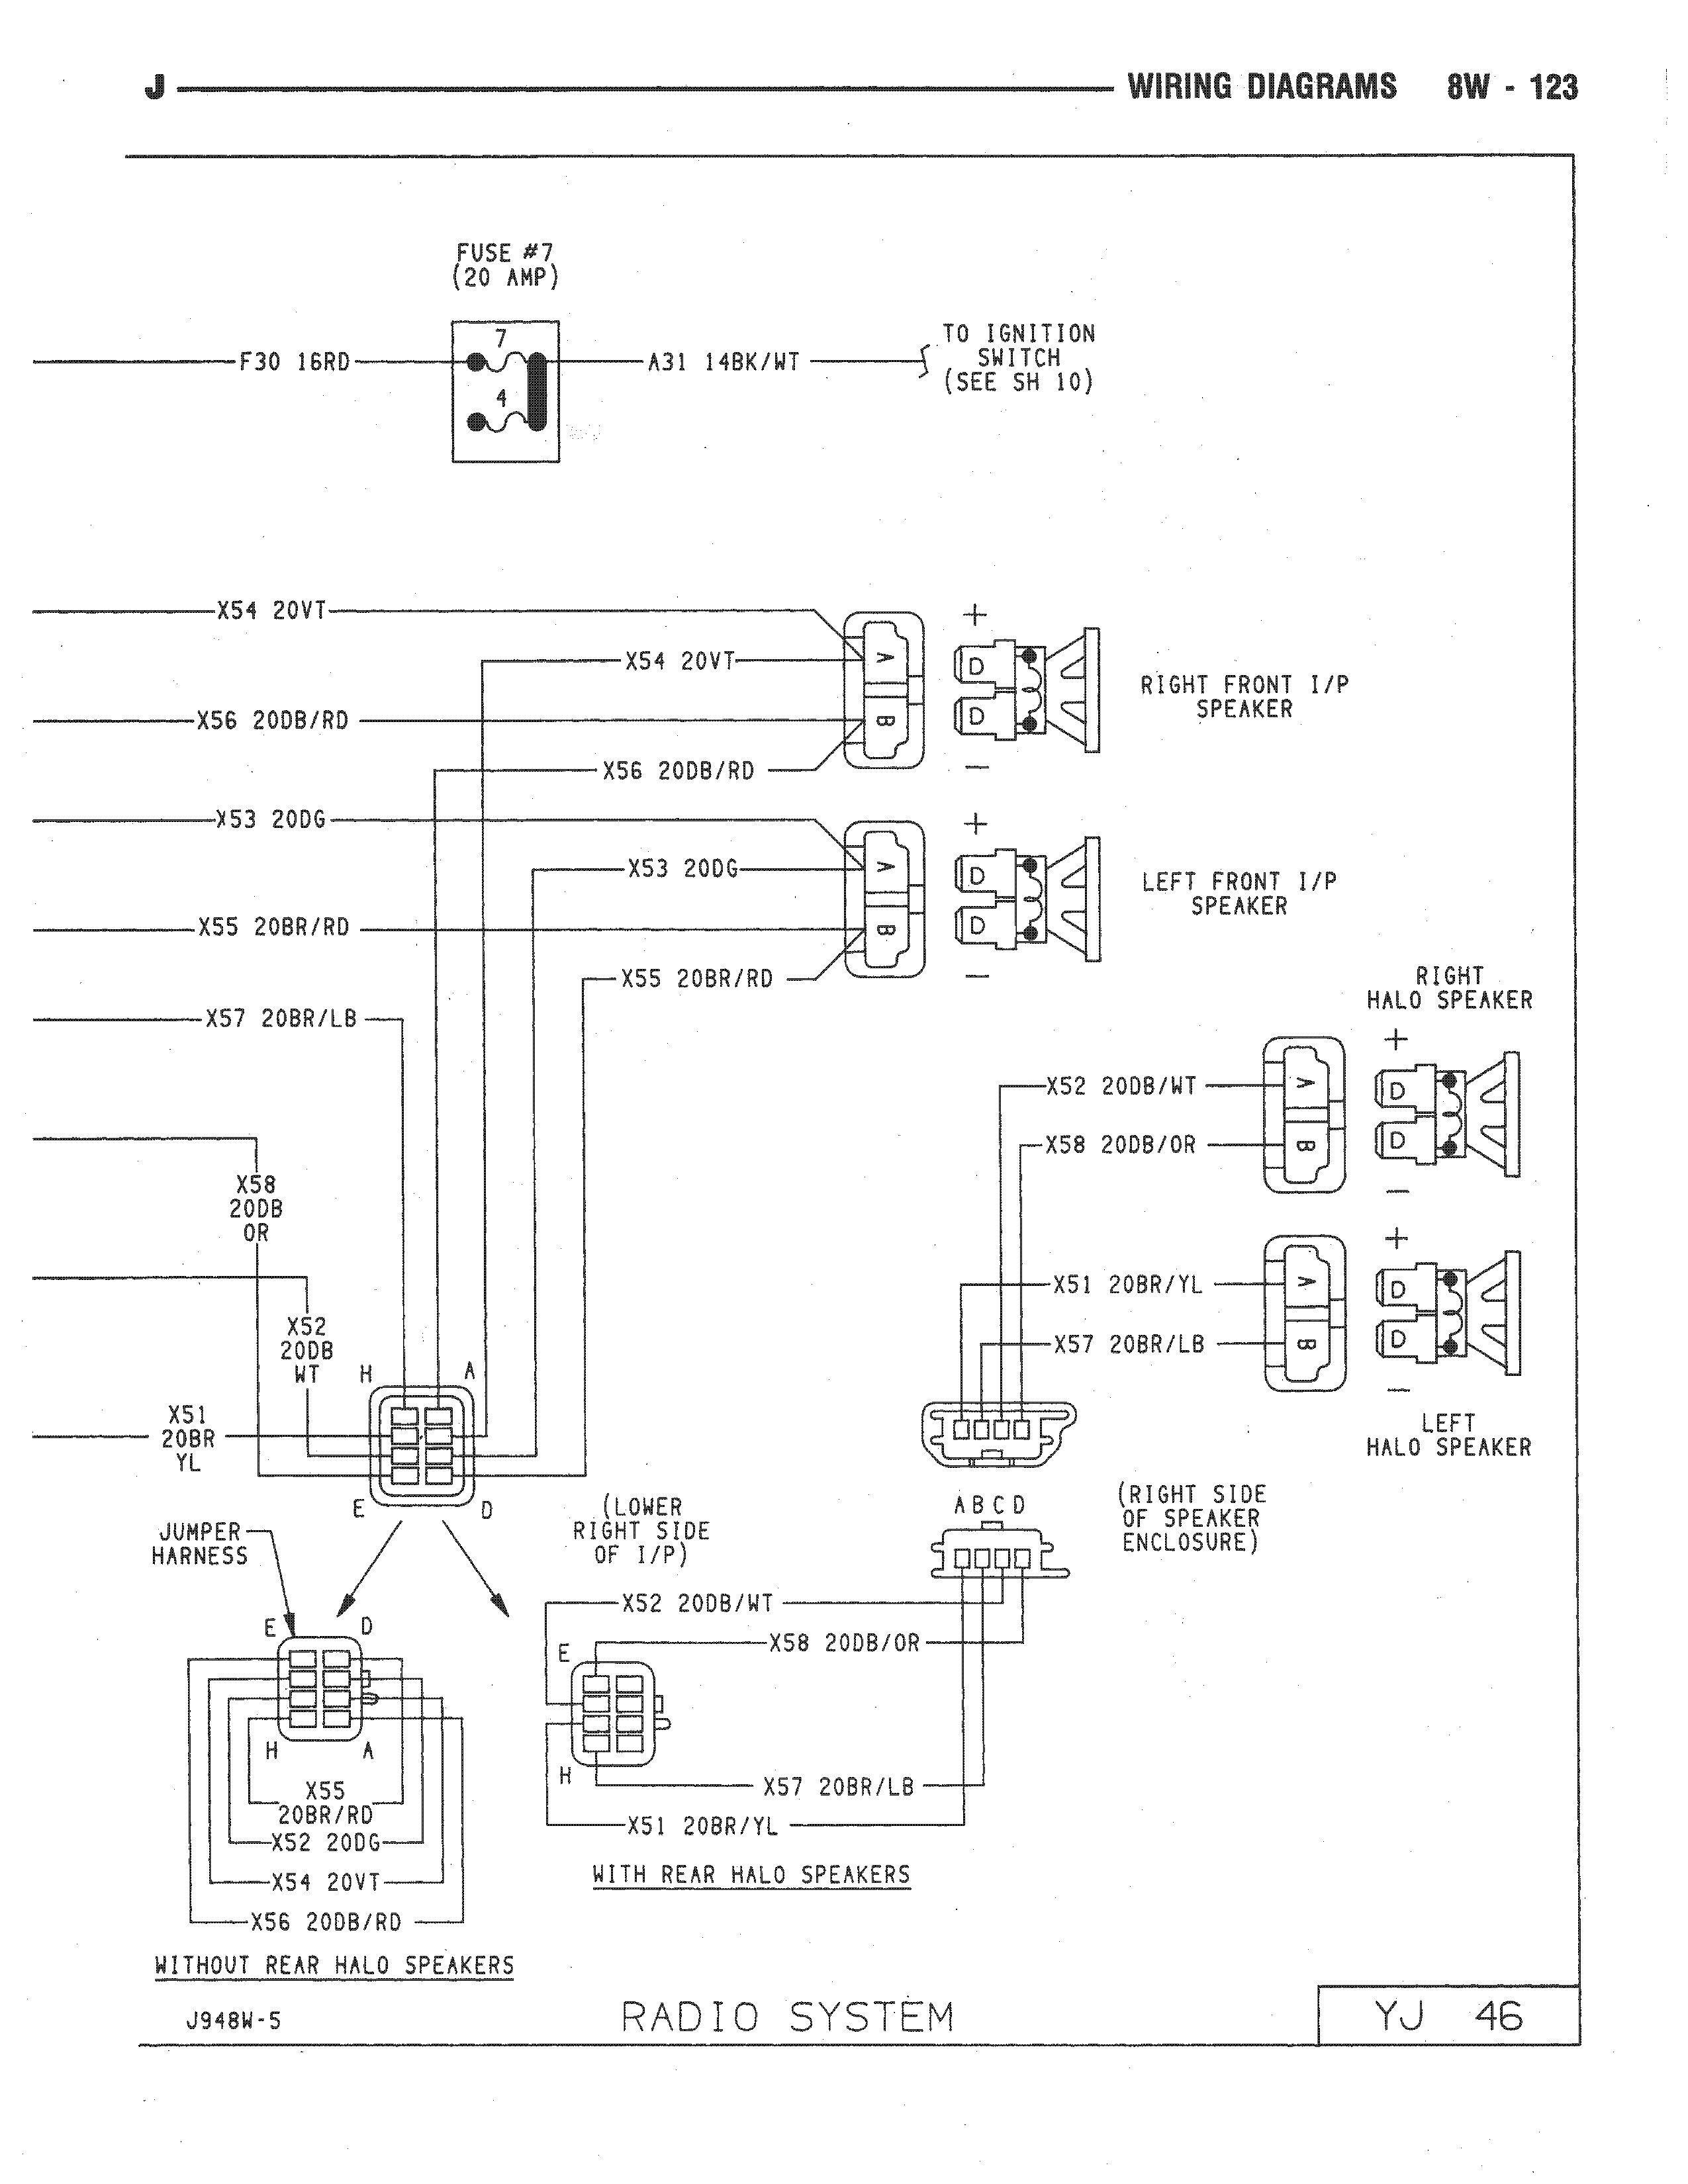 97 jeep grand cherokee wiring diagram for radio